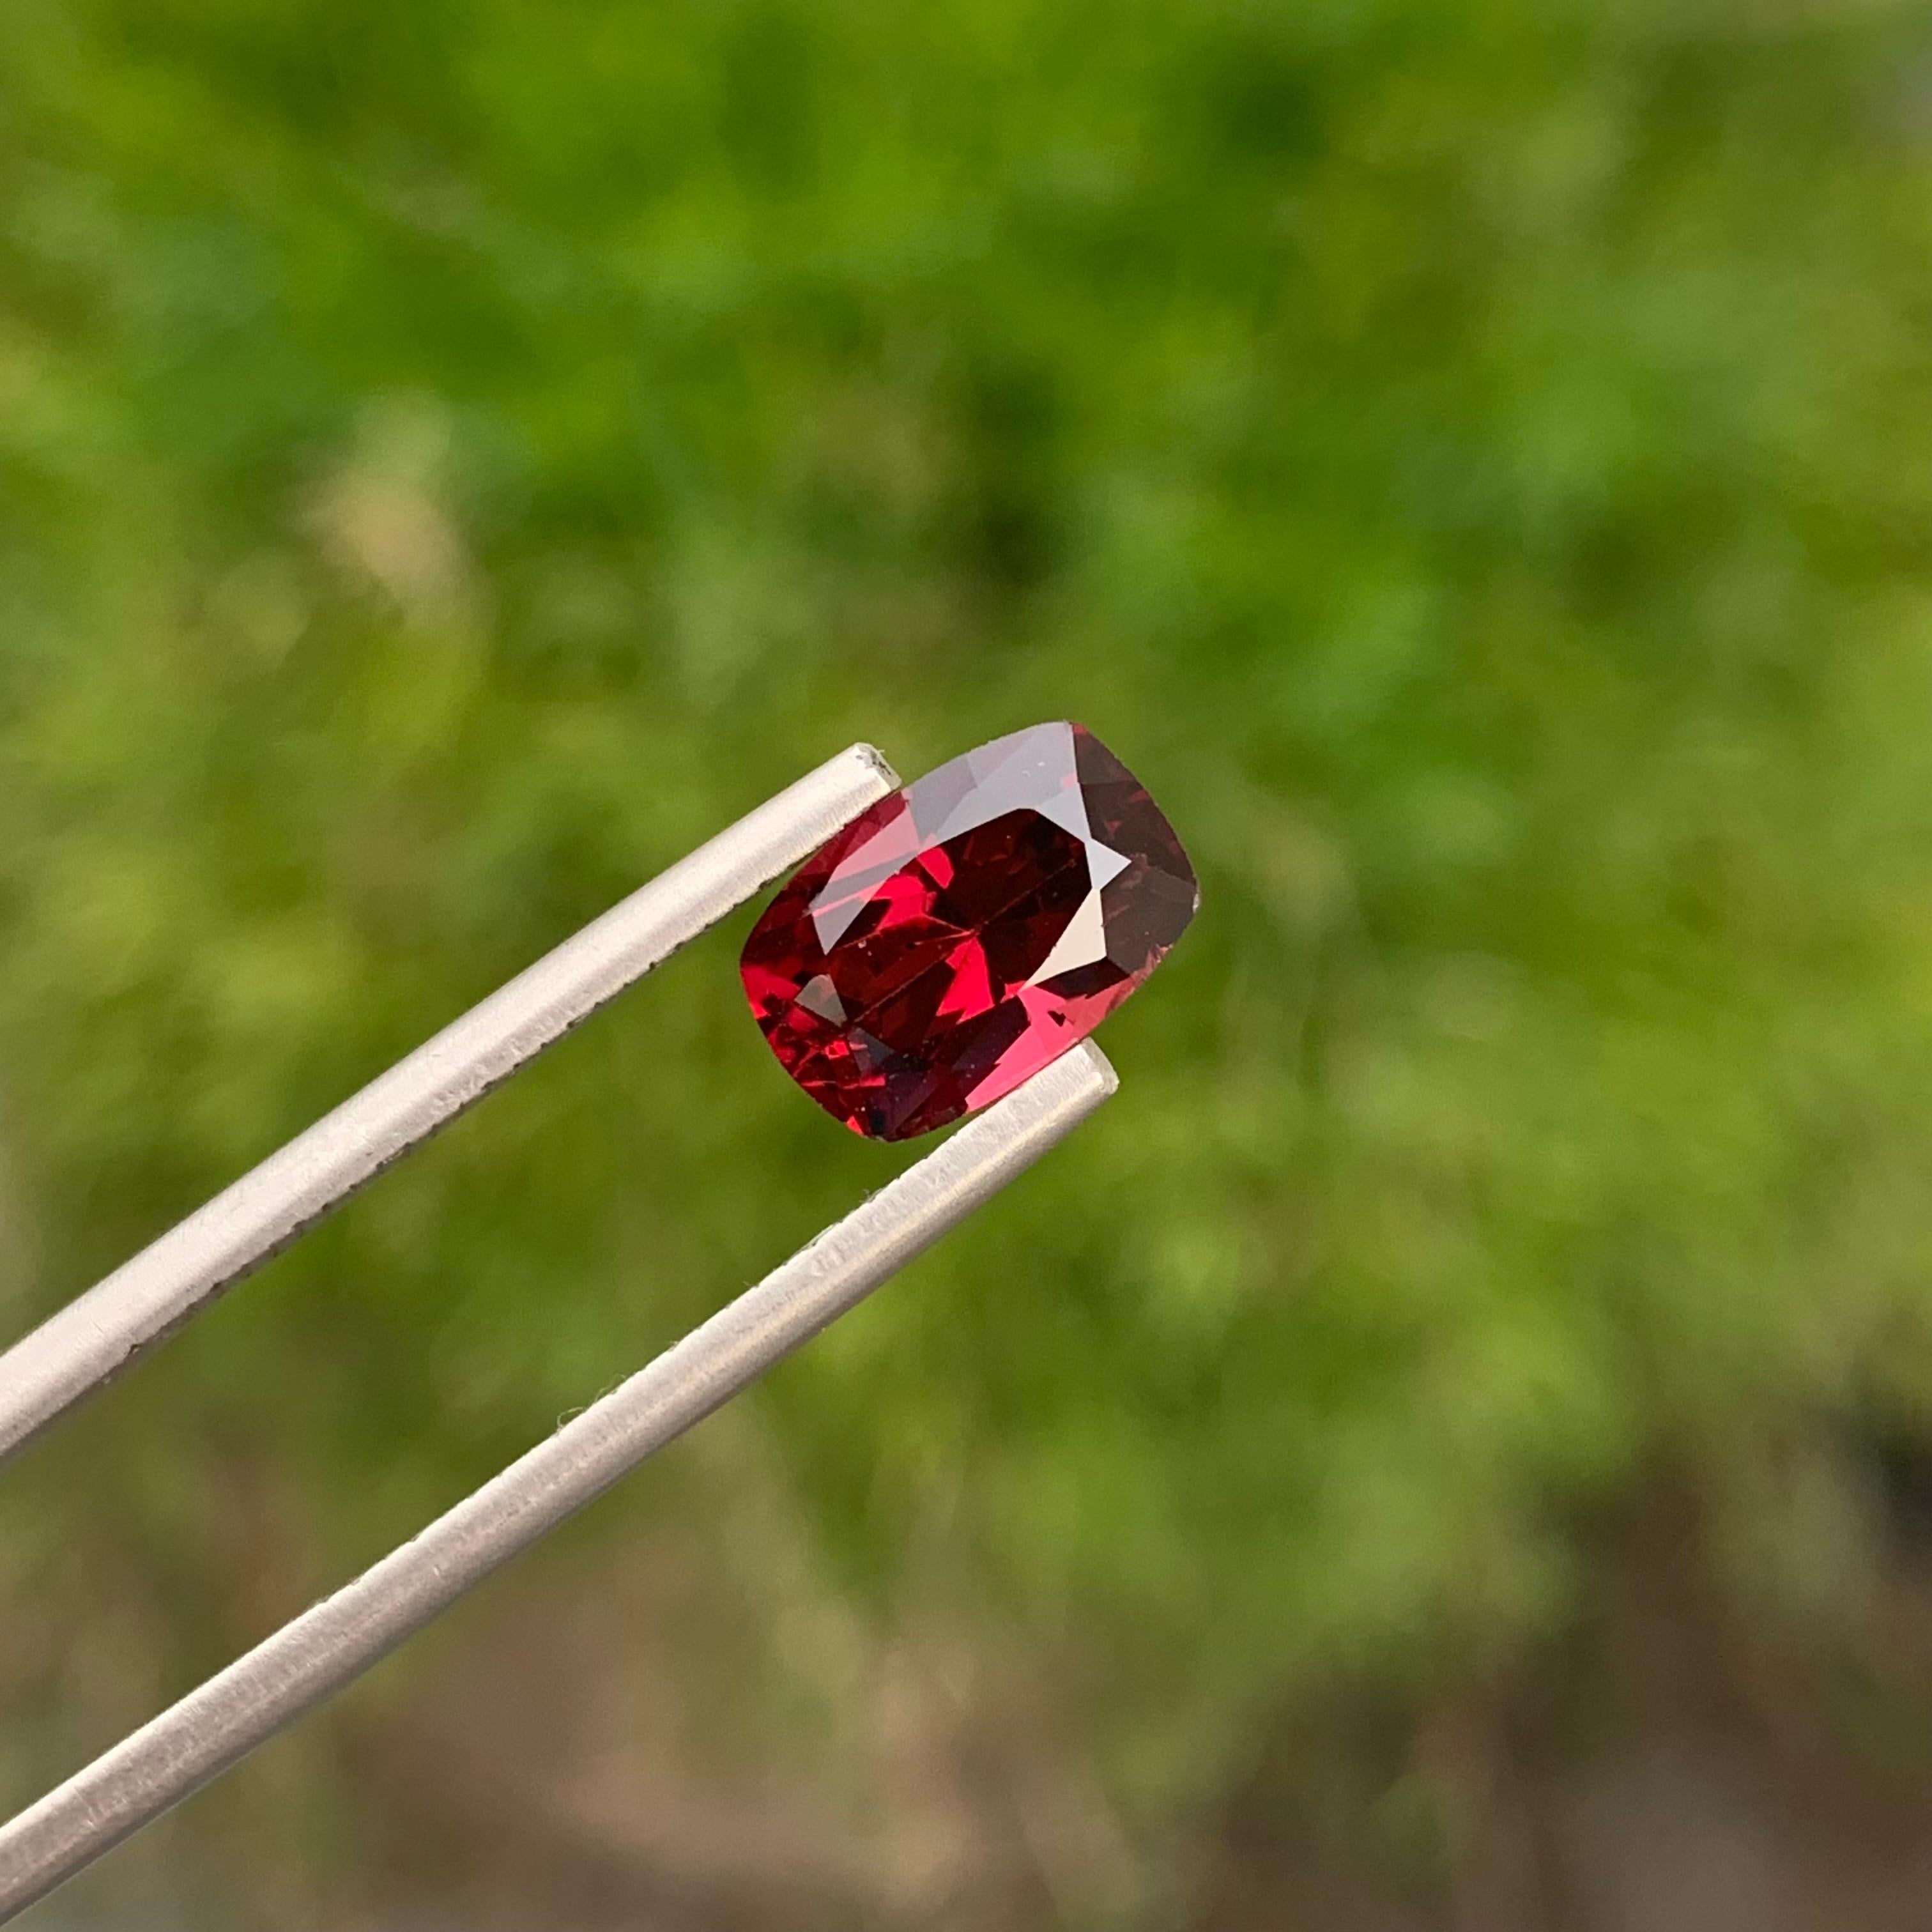 Loose Rhodolite Garnet
Weight: 2.85 Carats
Dimension: 9.8 x 6.6 x 5 Mm
Colour: Red
Origin: Africa
Treatment: Non
Shape : Oval

Rhodolite garnet, a gemstone celebrated for its enchanting reddish-purple hues, occupies a special place in the realm of